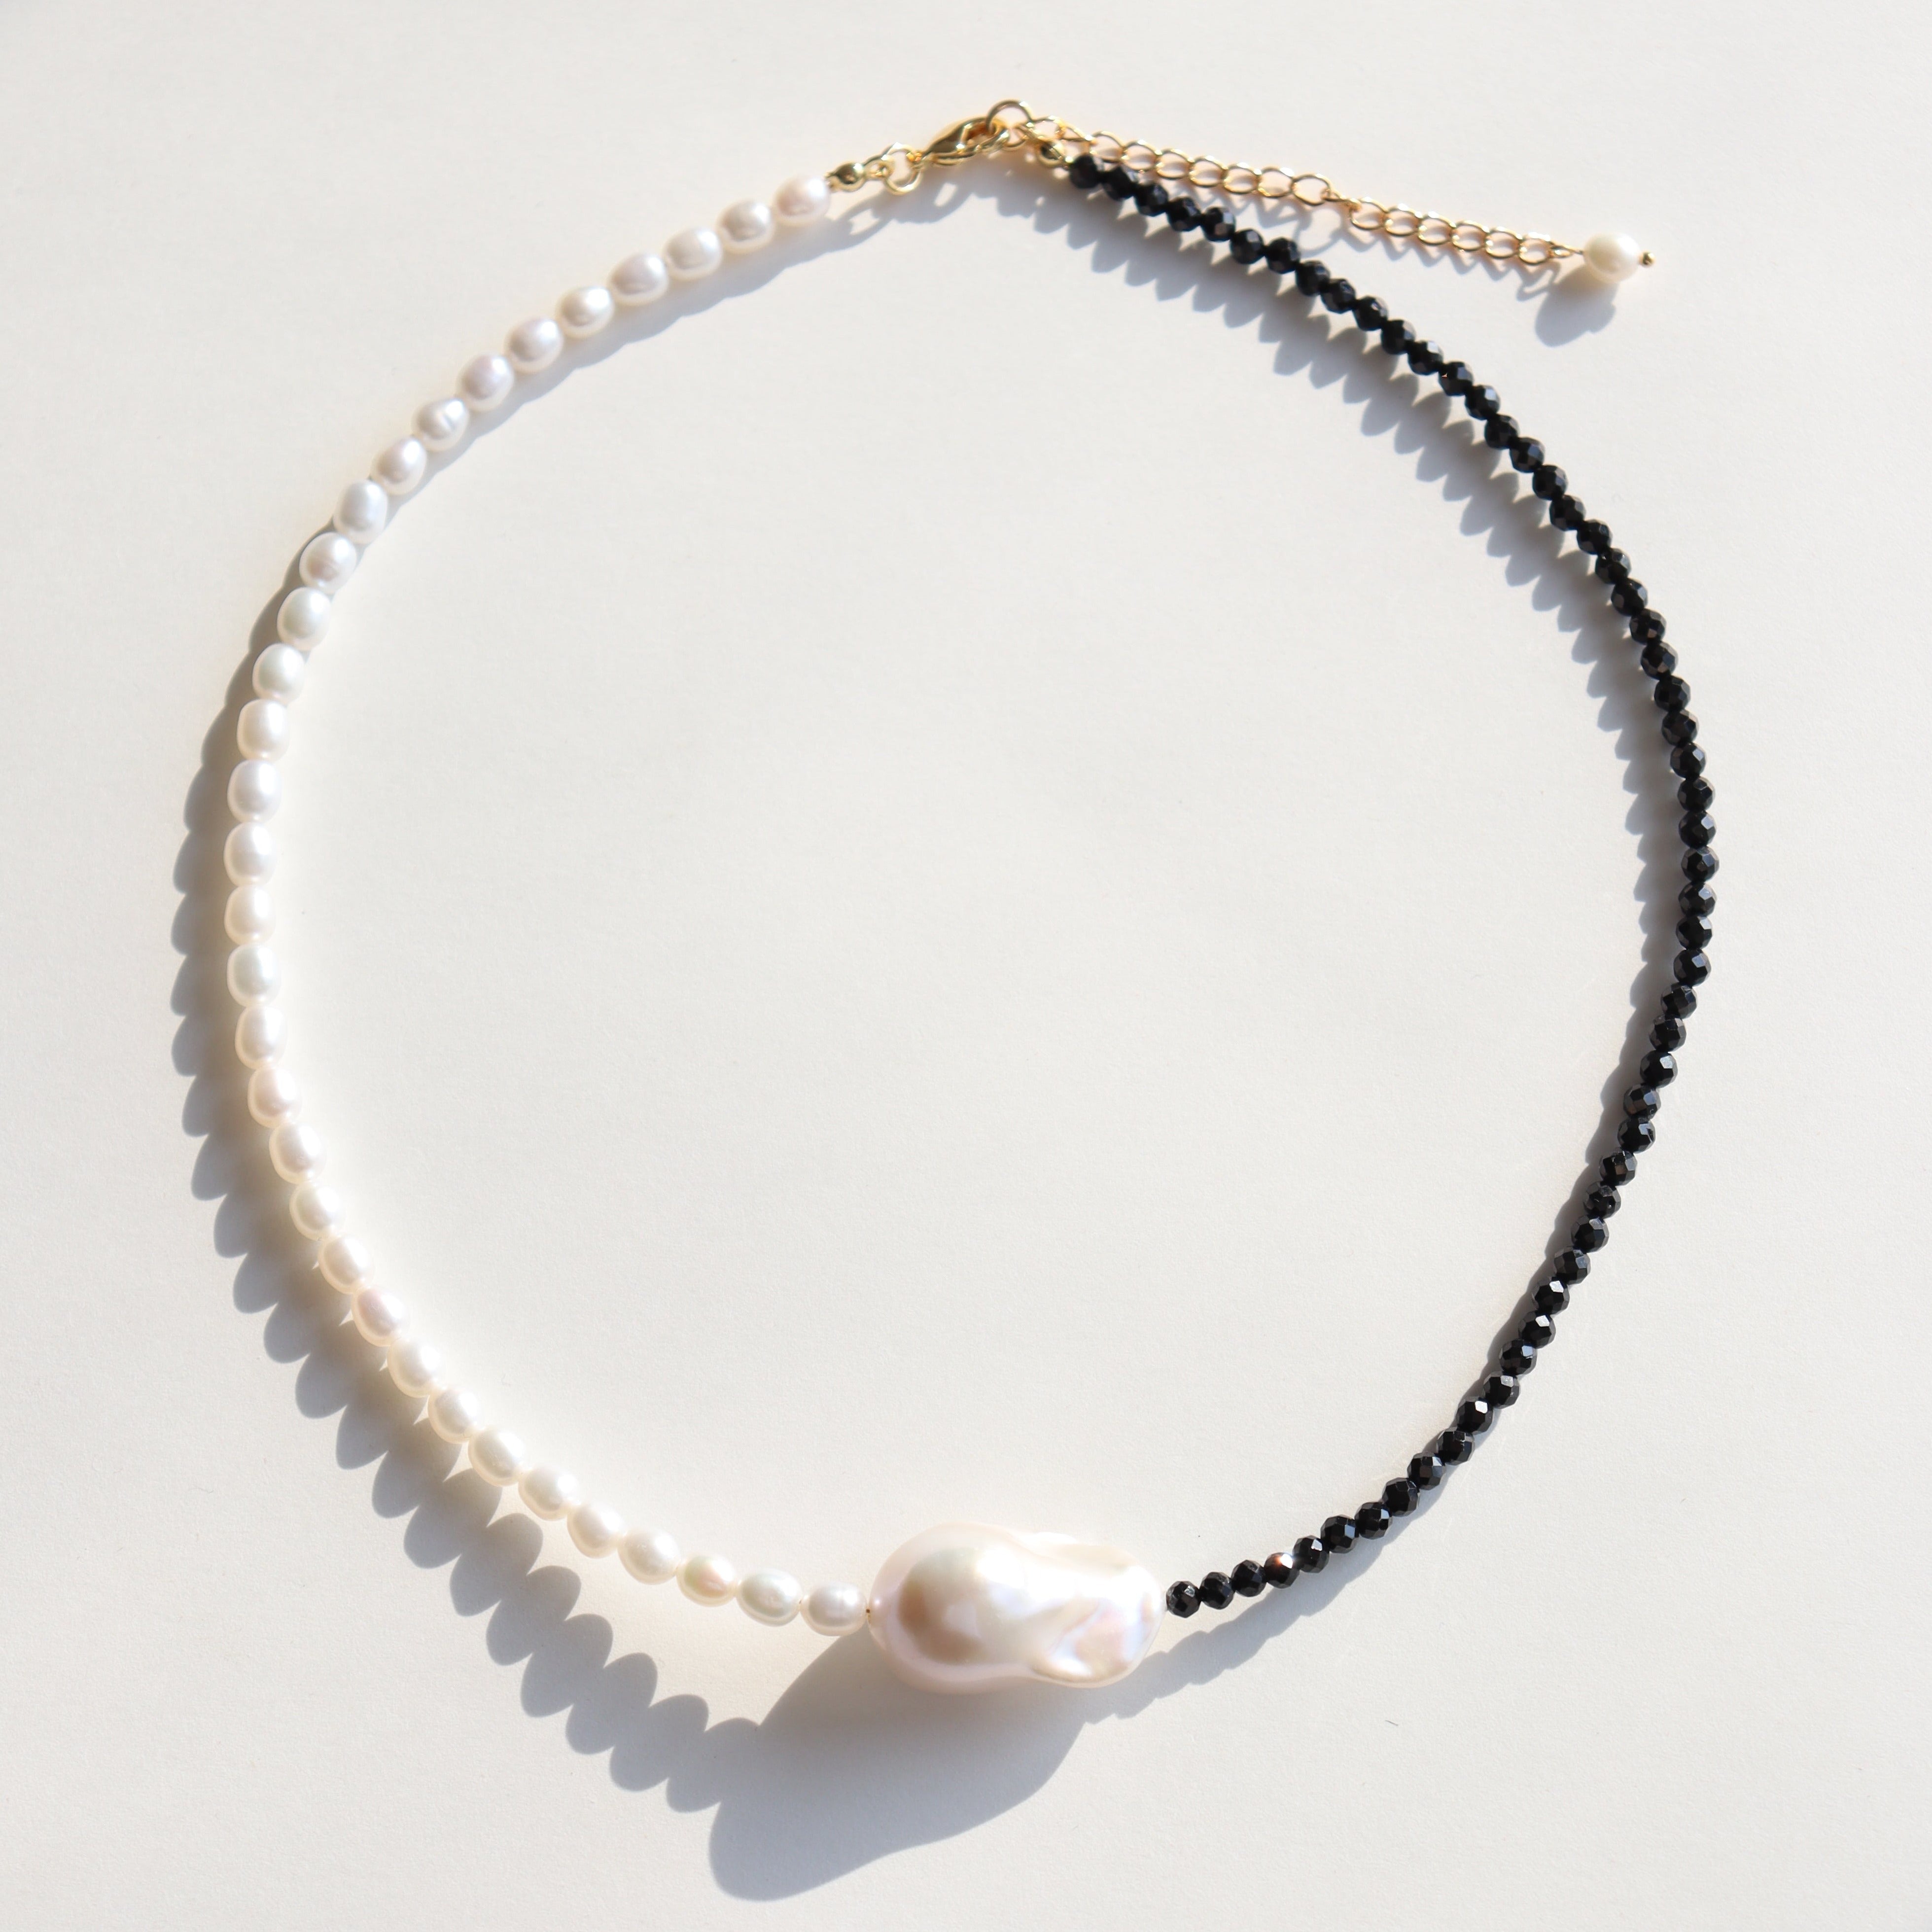 Baroque Pearl Stitching Black Spinel Freshwater Pearl Necklace - floysun